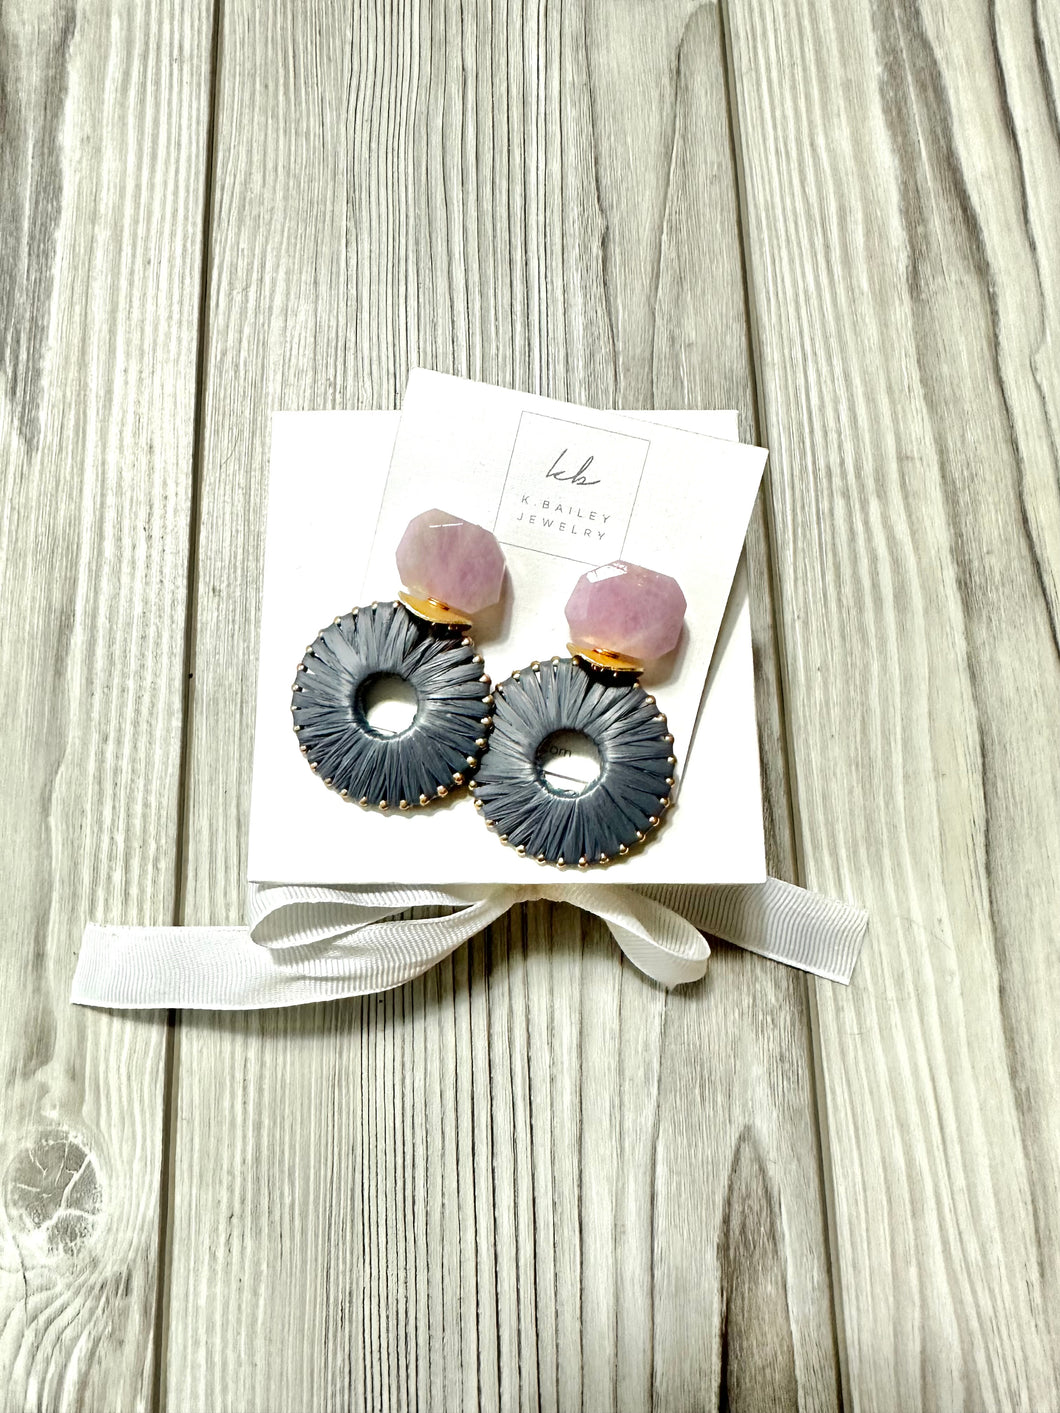 K.Bailey custom made earrings. Blush stone with post and raffia wrapped light grey pendants.